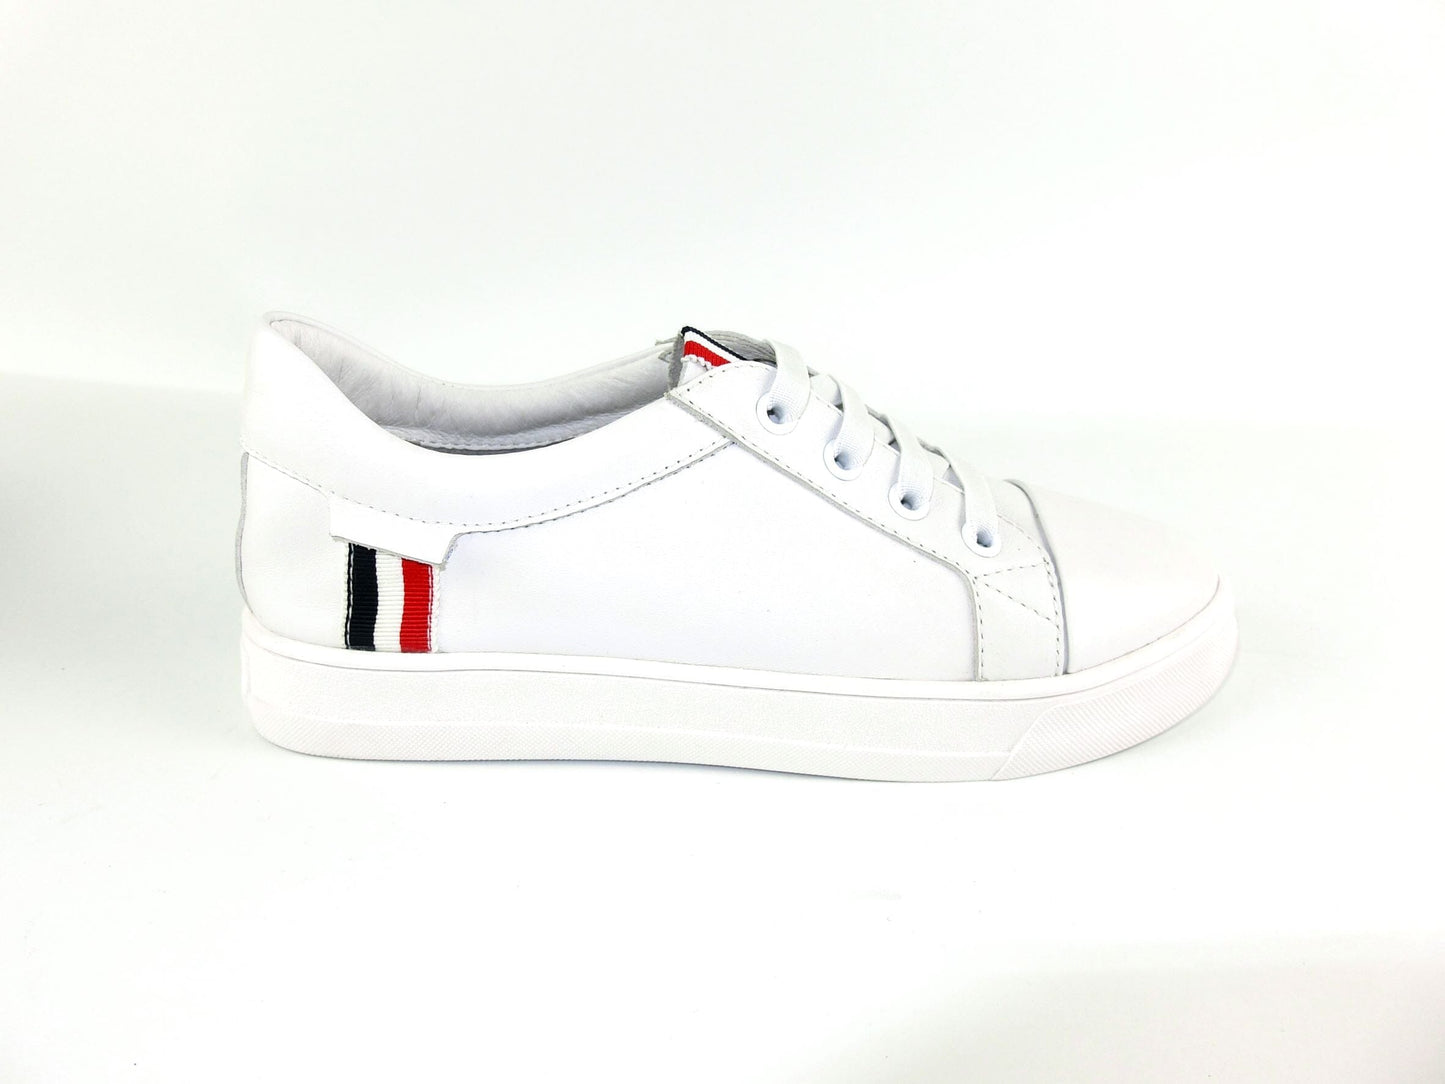 SS22003 Genuine leather sneakers with extra cushions- White with Blue/Red ribbons sneakers Sam Star Shoes 37/4 White blue/red 